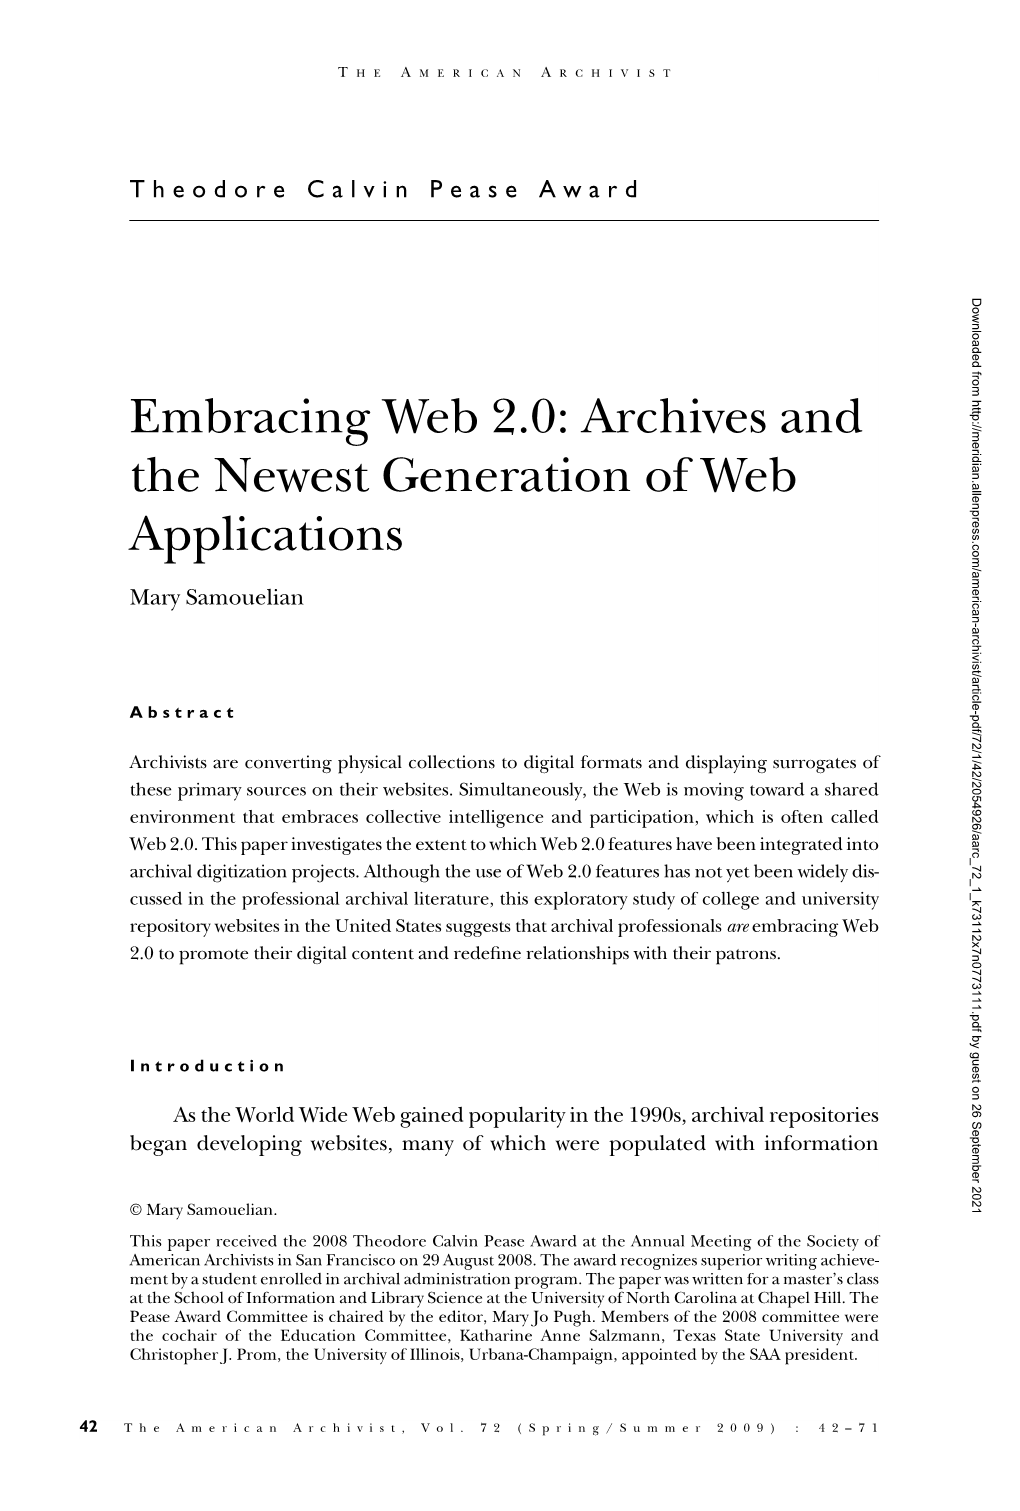 Embracing Web 2.0: Archives and the Newest Generation of Web Applications